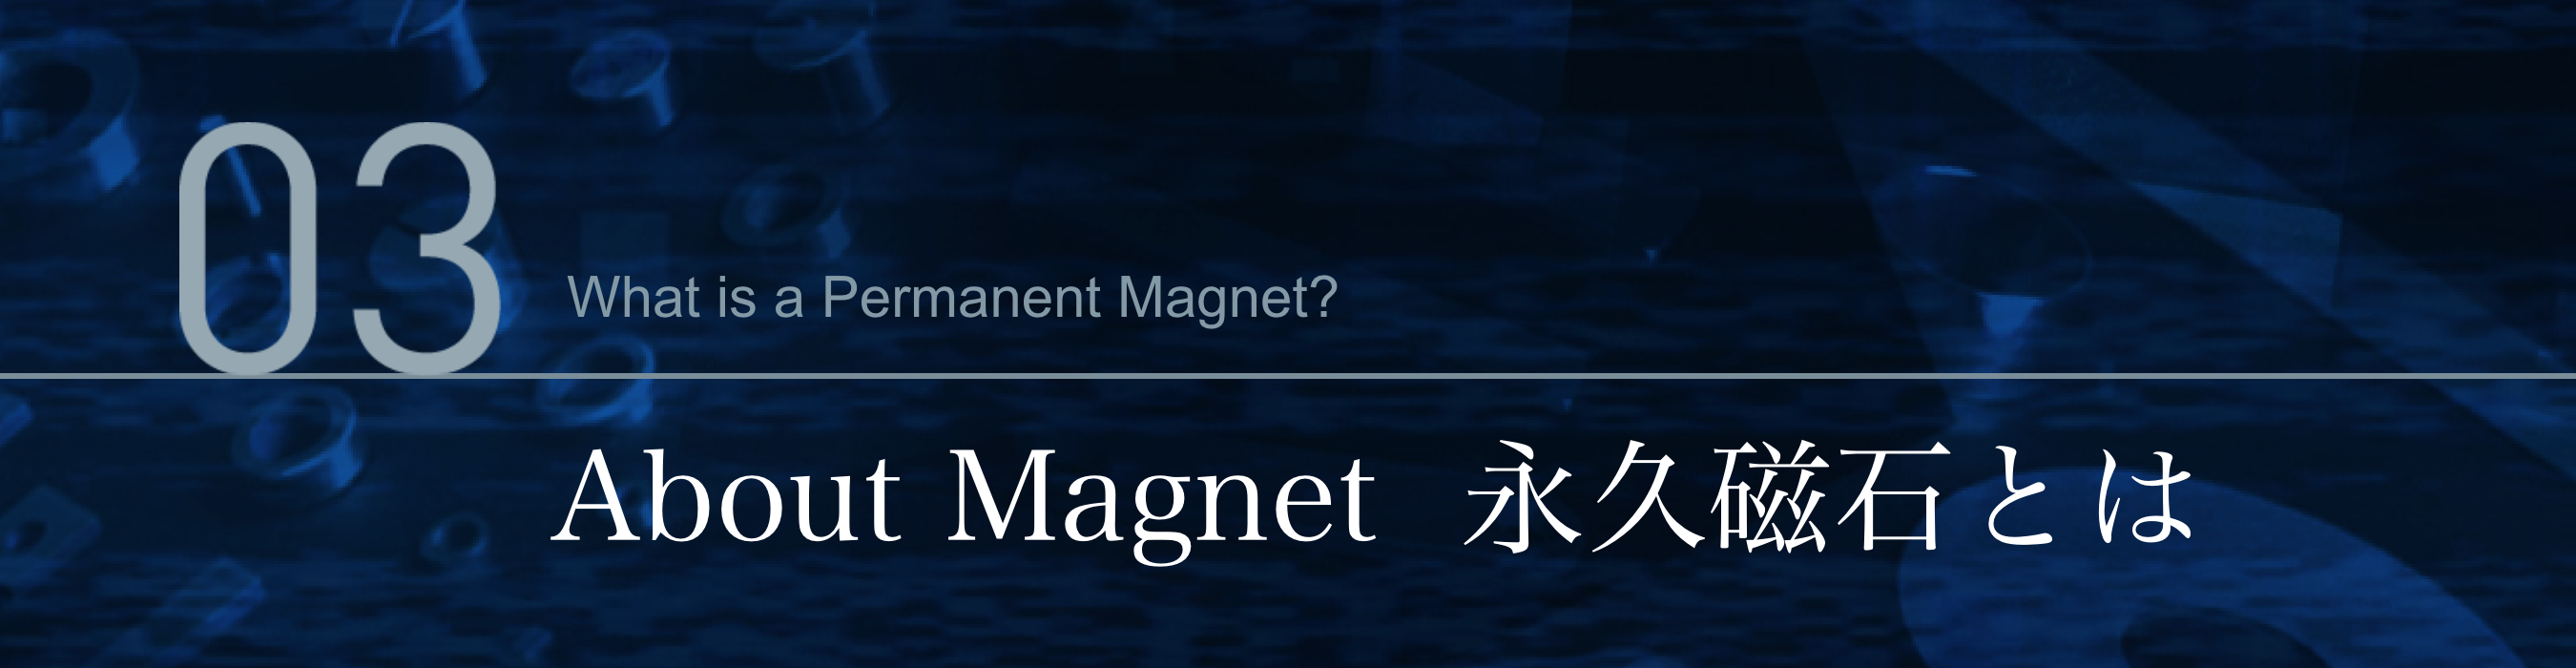 About Magnet 永久磁石とは